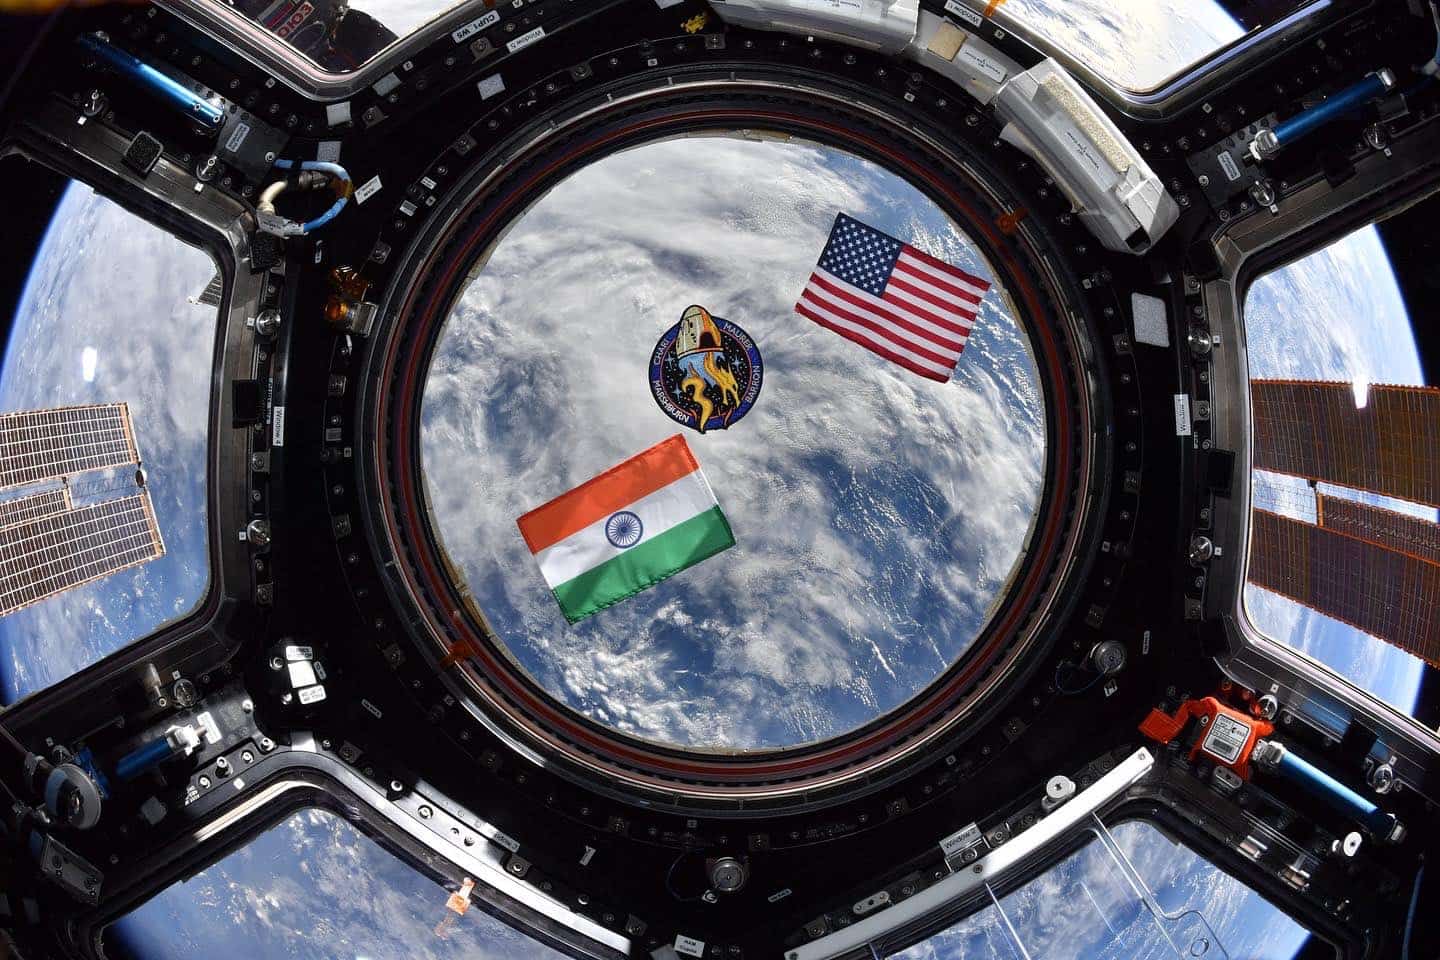 Indian flag unfurled in the space!